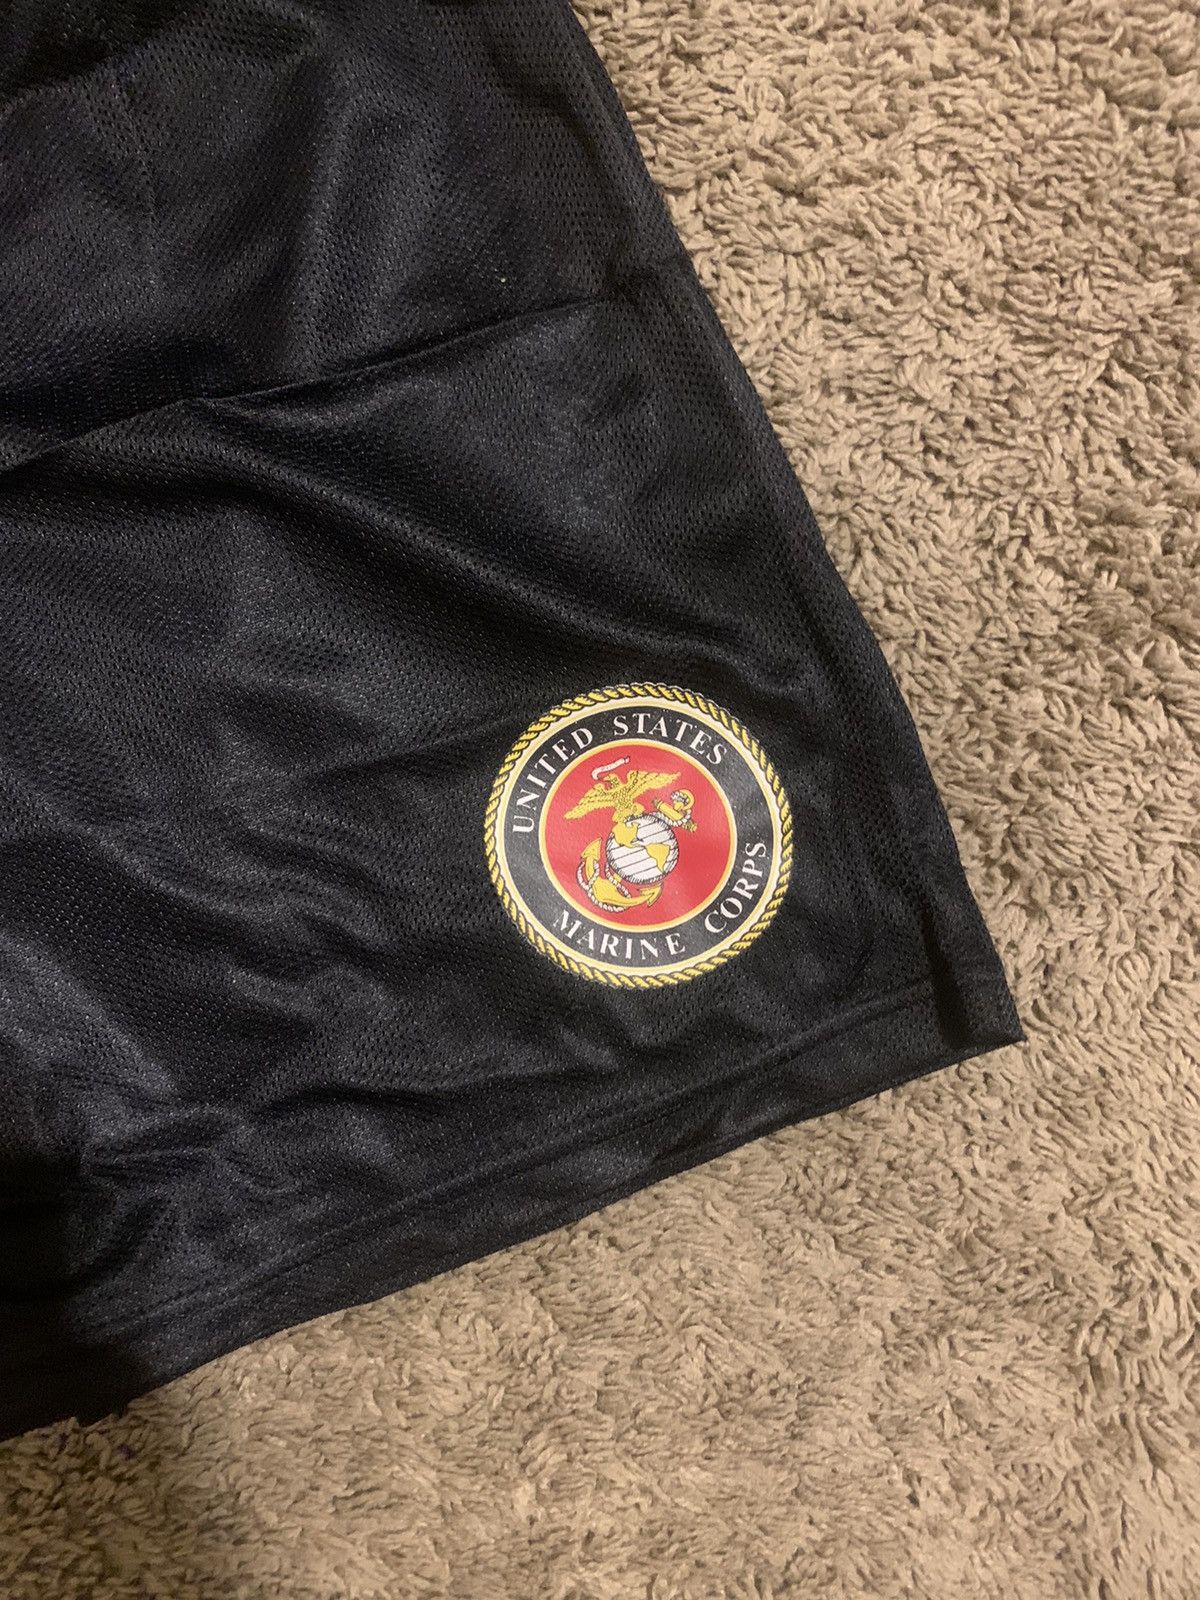 Jerzees Vintage United States marine corps shorts 90s size medium Size US 34 / EU 50 - 2 Preview